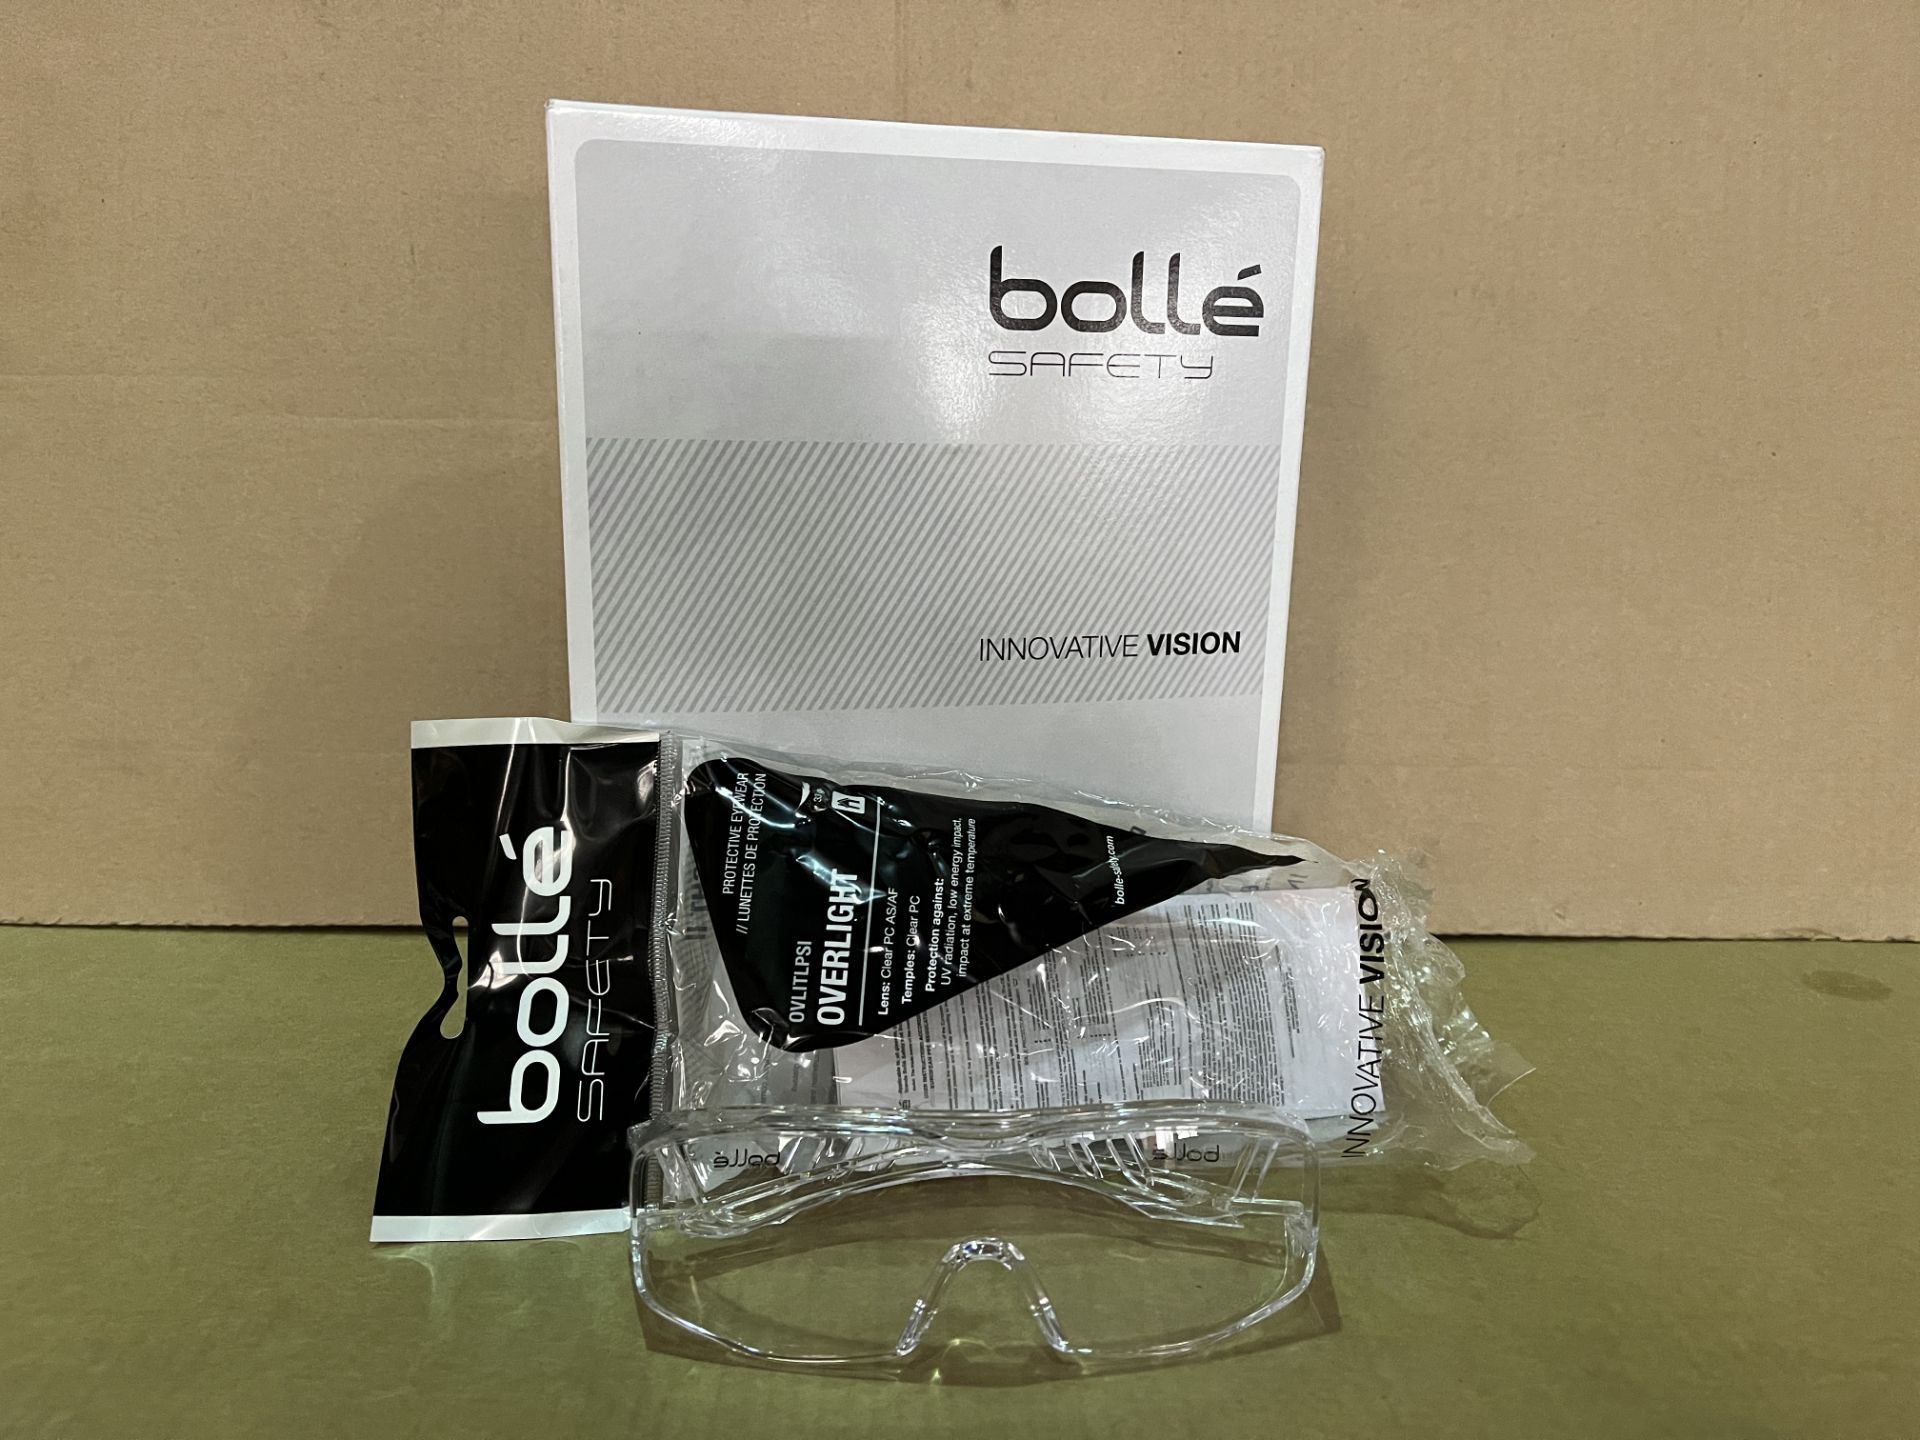 30 X BRAND NEW BOLLE SAFETY OVERLIGHT PROTECTIVE EYEWEAR RRP £14 EACH R15